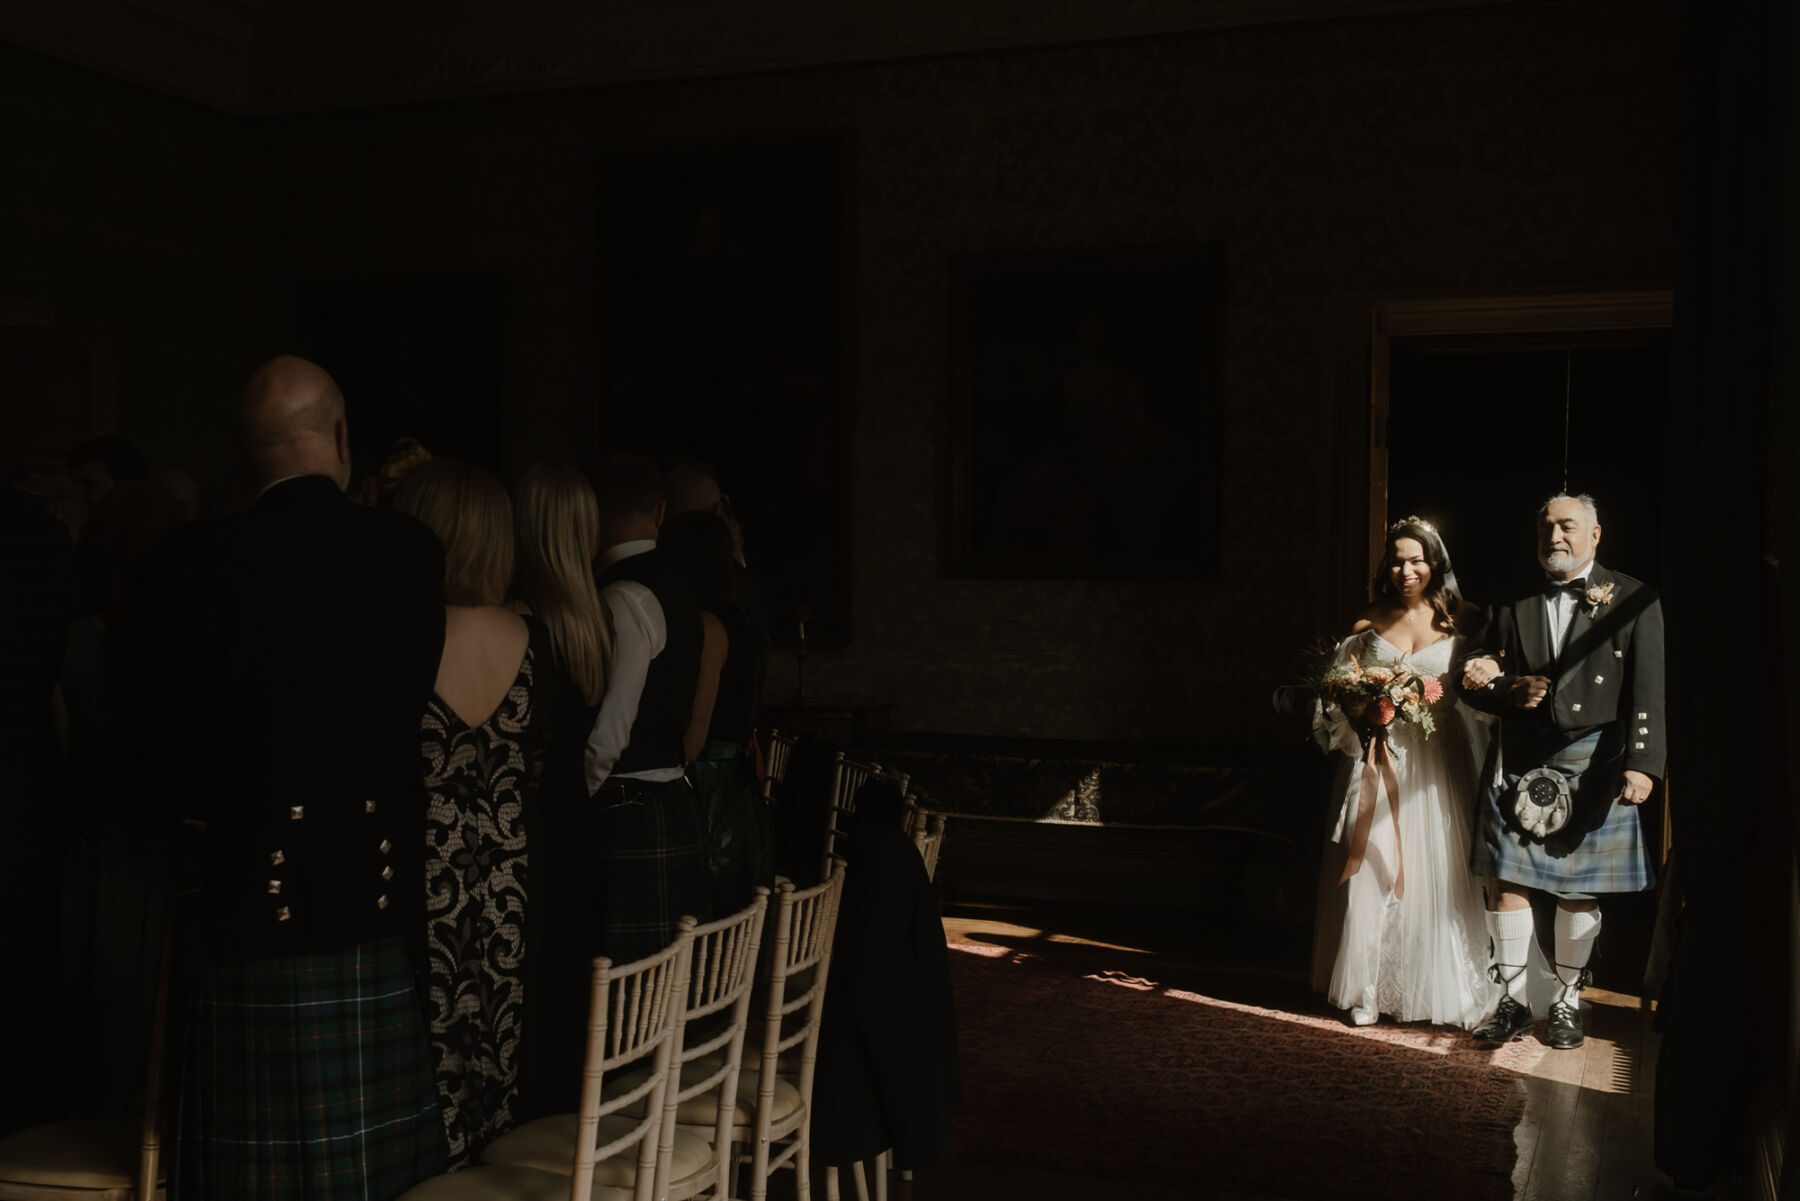 Bride arriving at her wedding ceremony at Cambo Estate, with her father wearing a kilt. She carries an Autumn wedding bouquet.